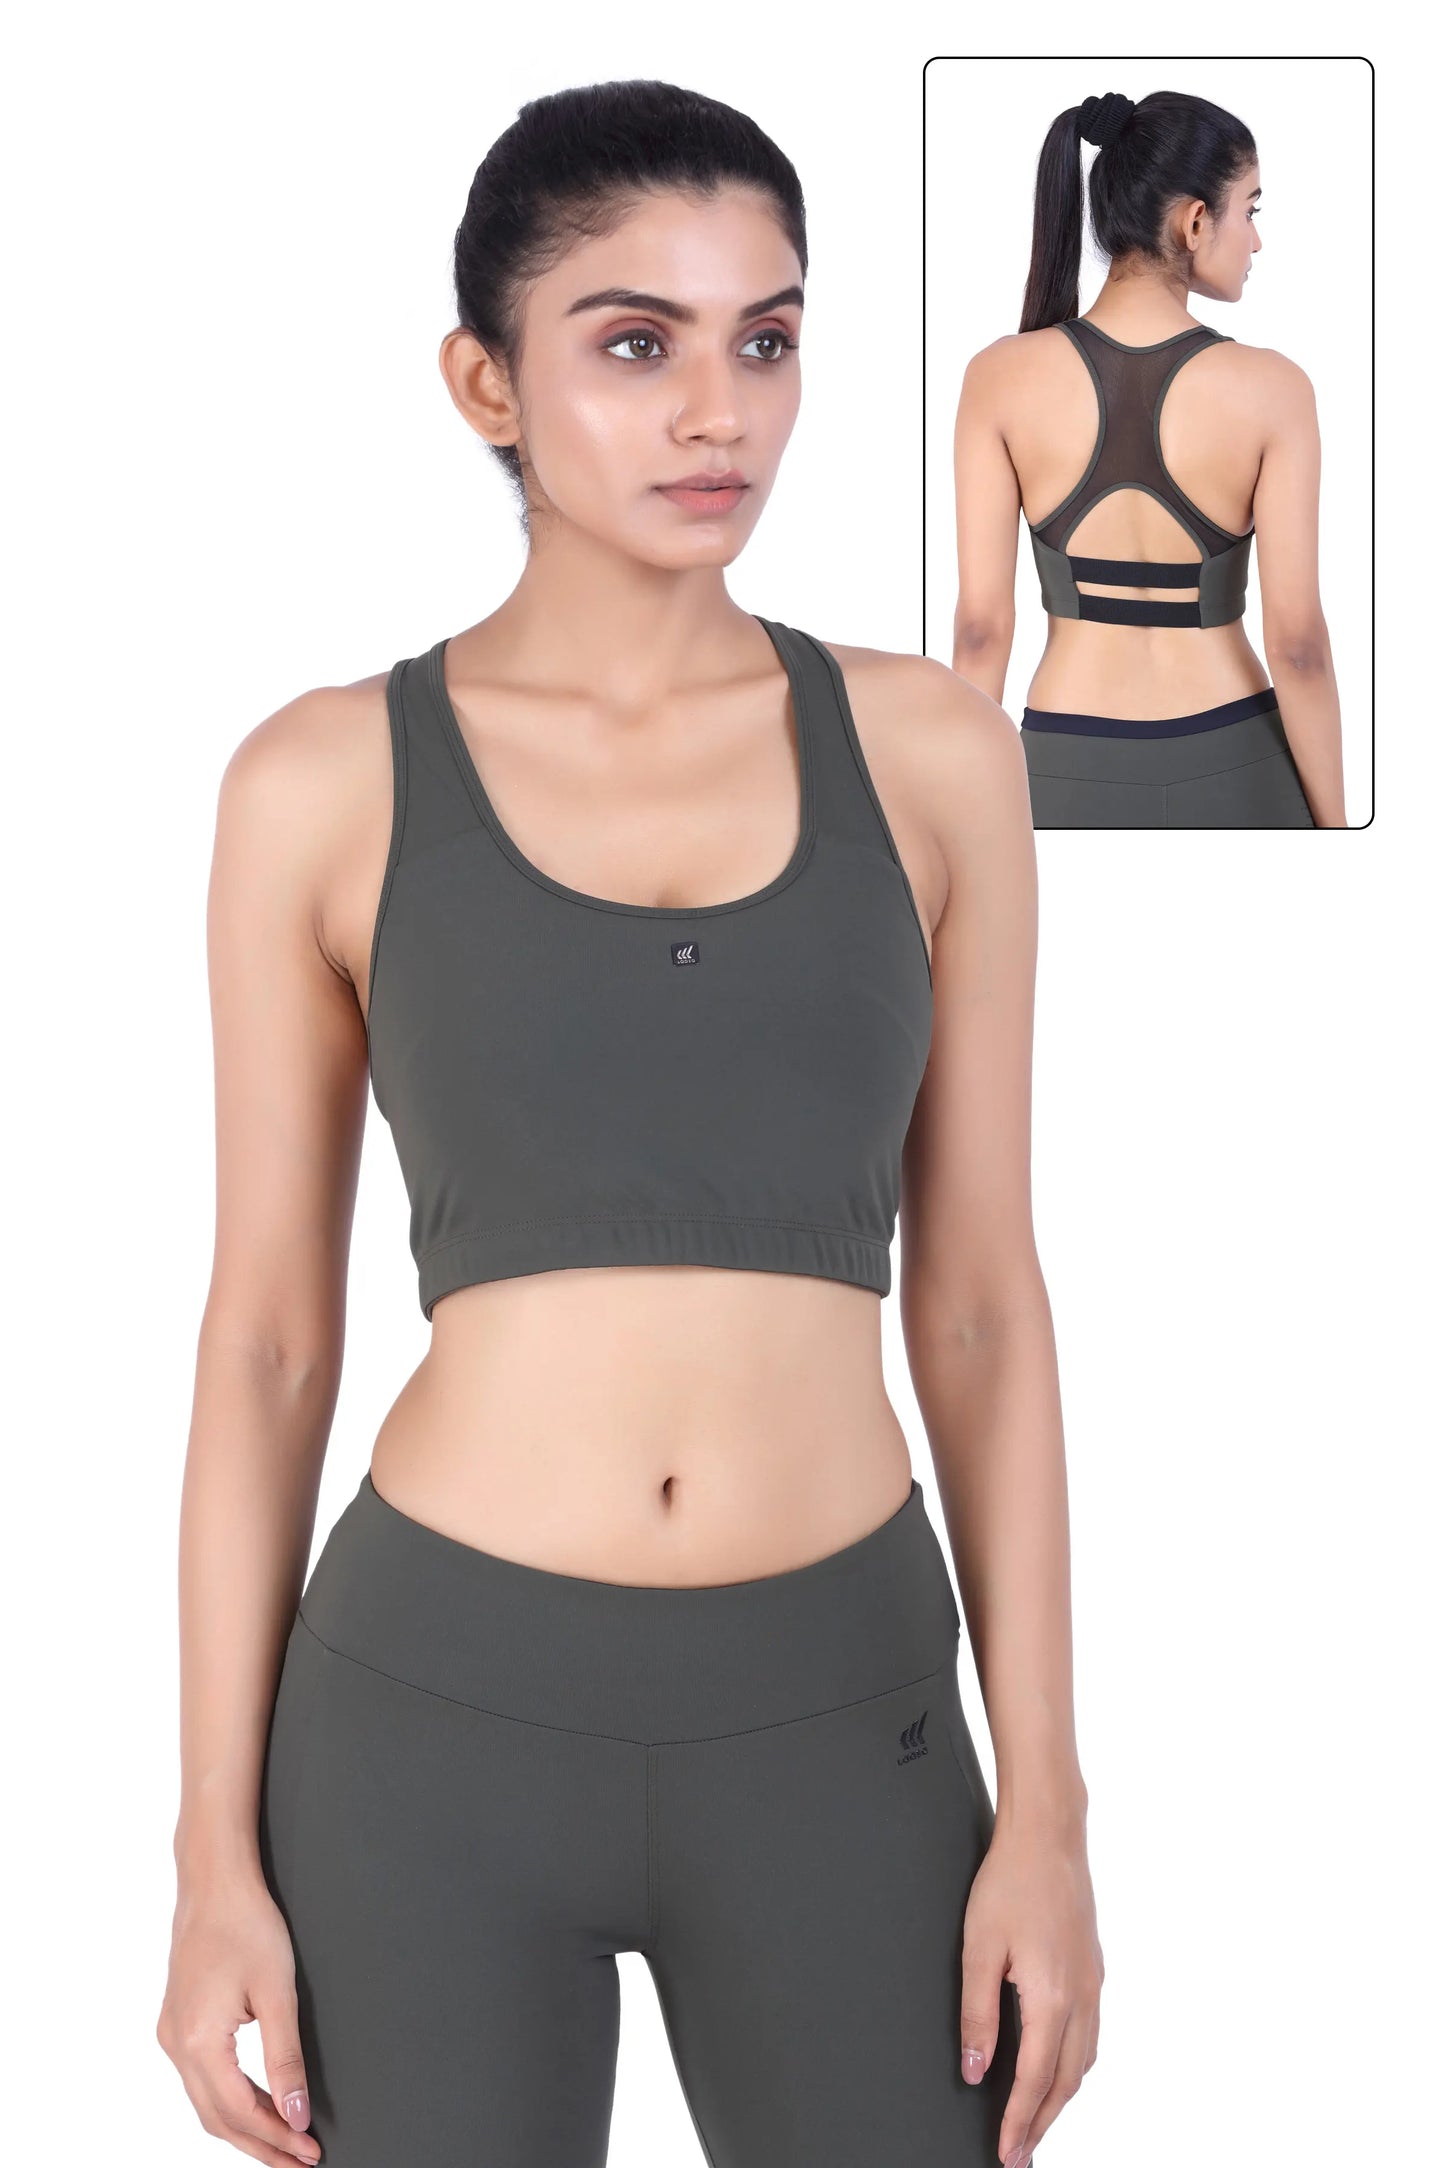 JUST-DRY HIGH IMPACT WORKOUT SPORTS BRA